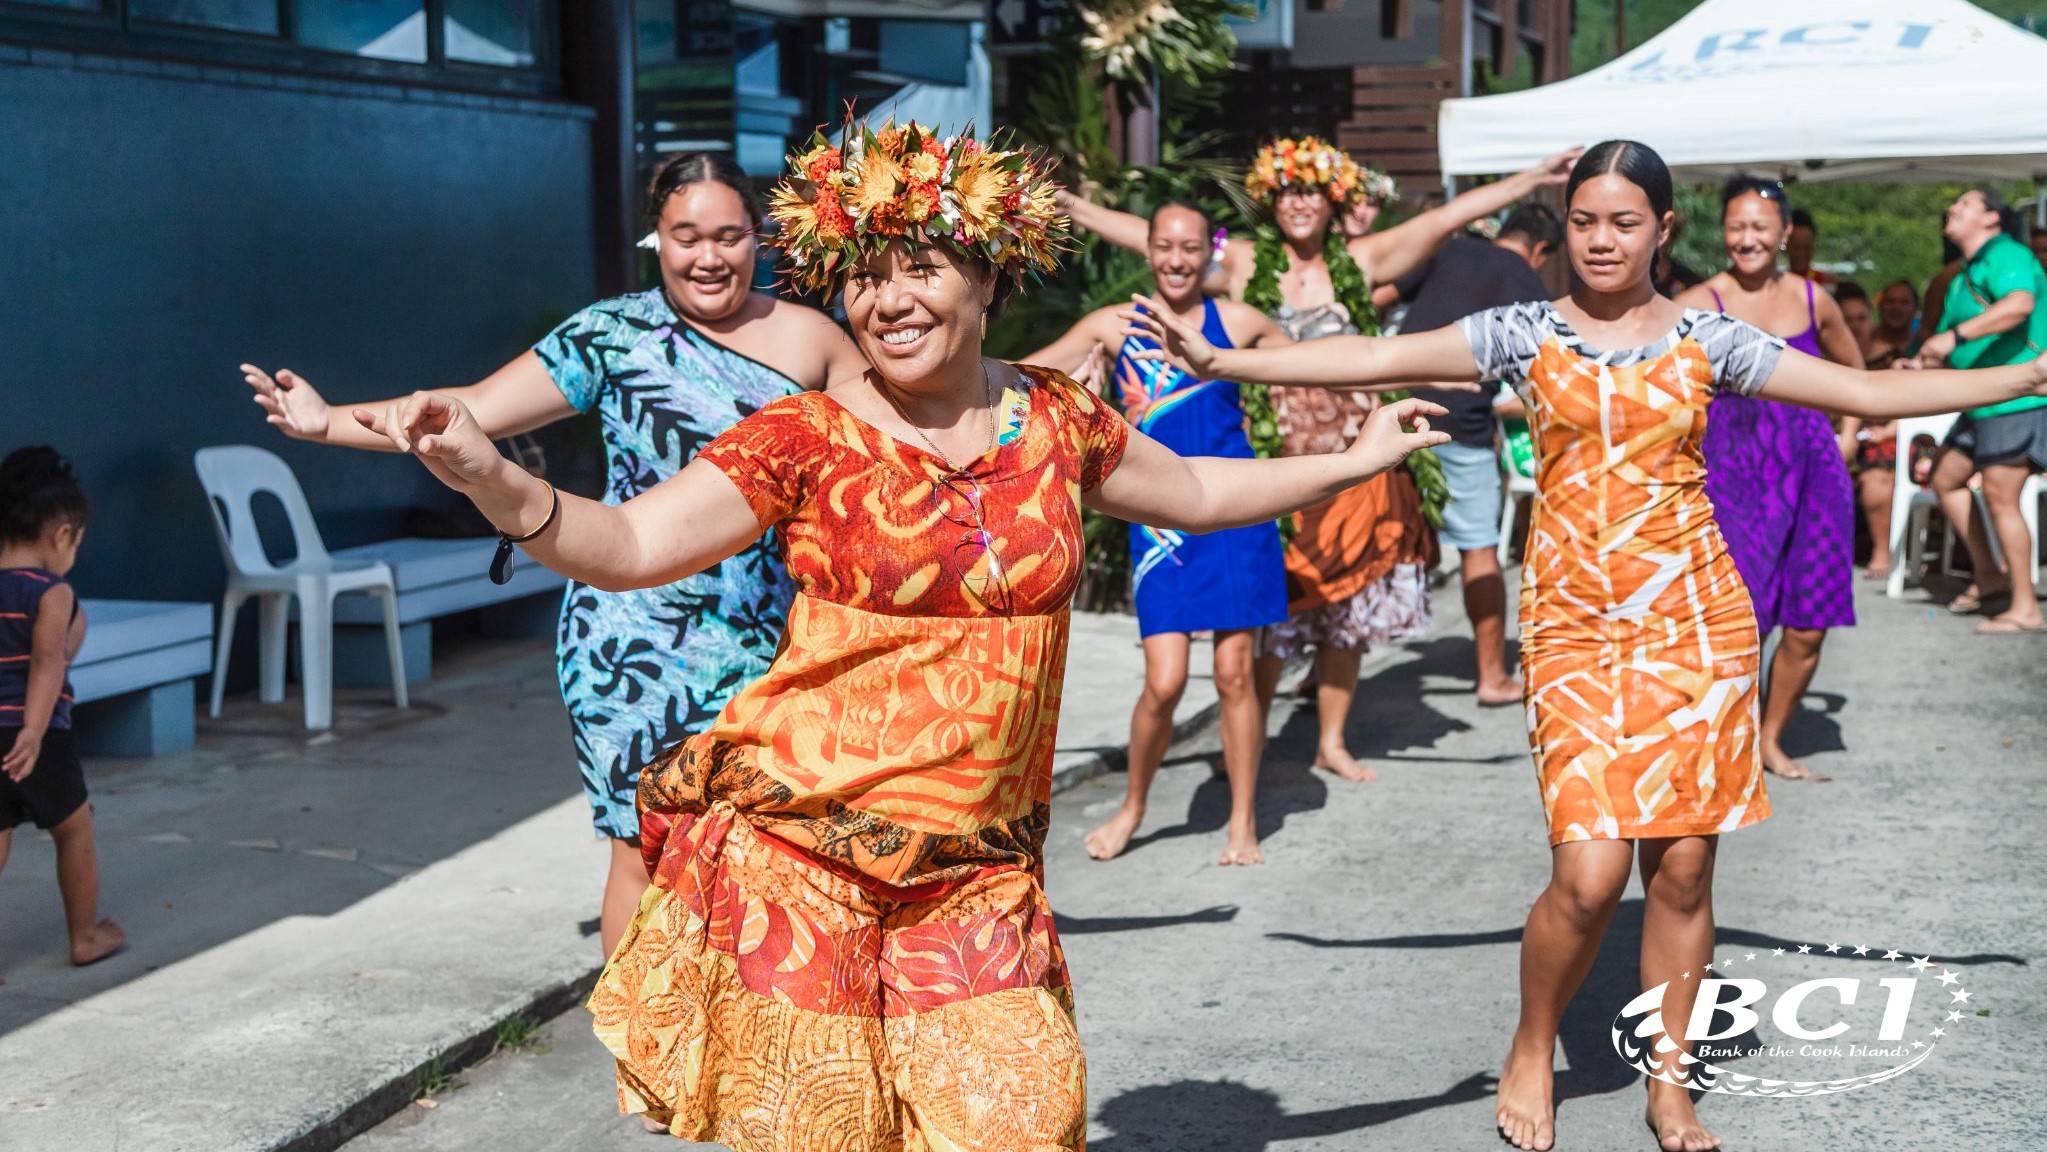 Bank of the Cook Islands celebrates 21st anniversary in true island style